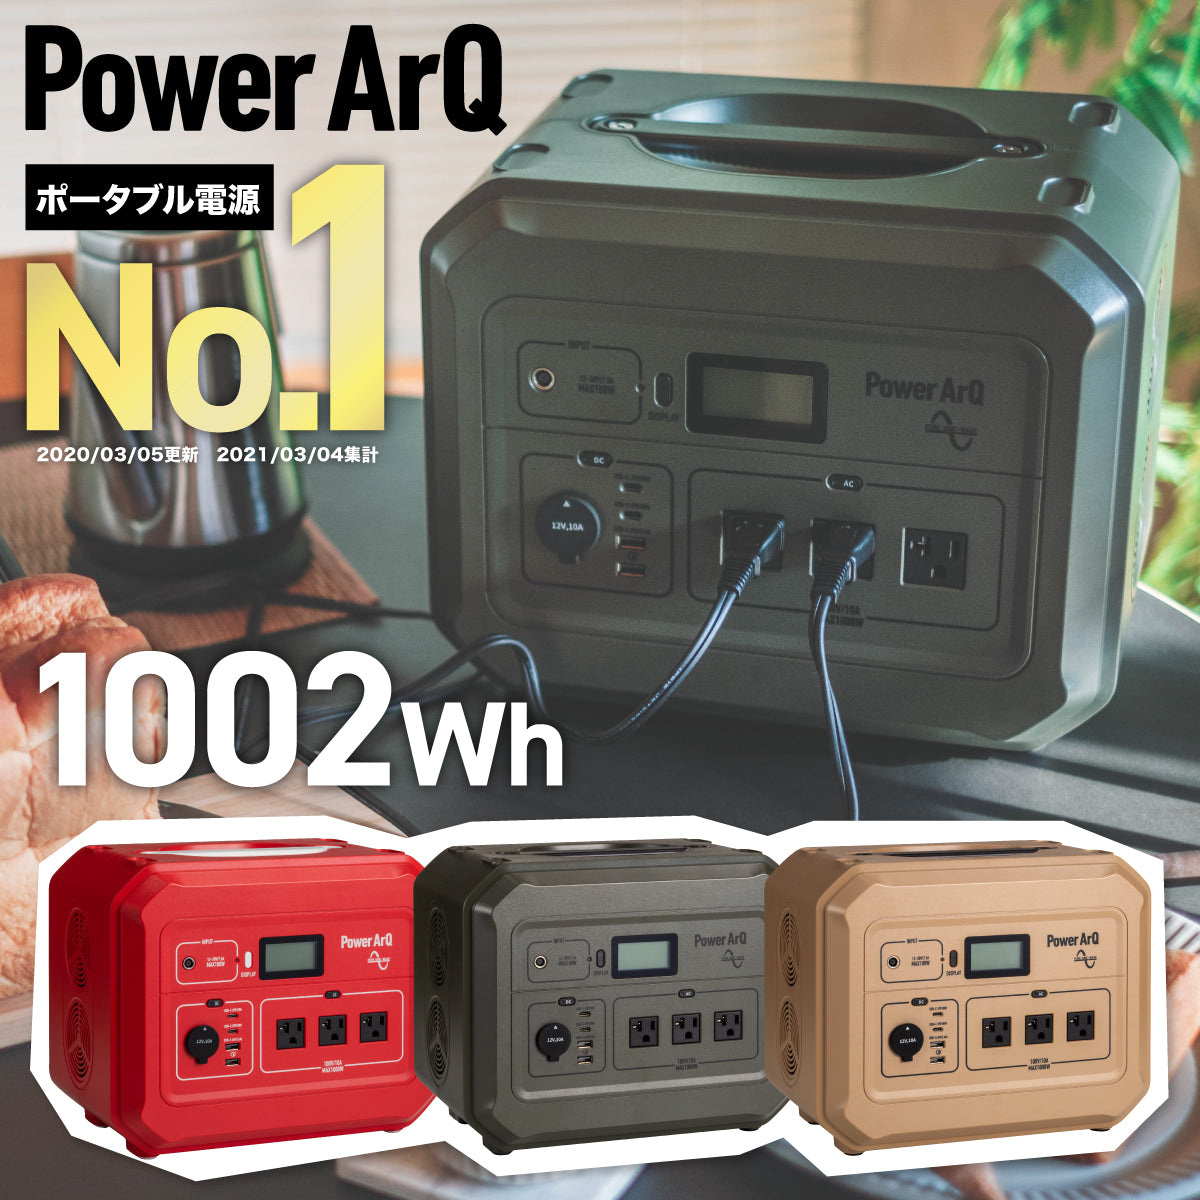 PowerArQ S7 ポータブル電源 716Wh – PowerArQ（パワーアーク）公式